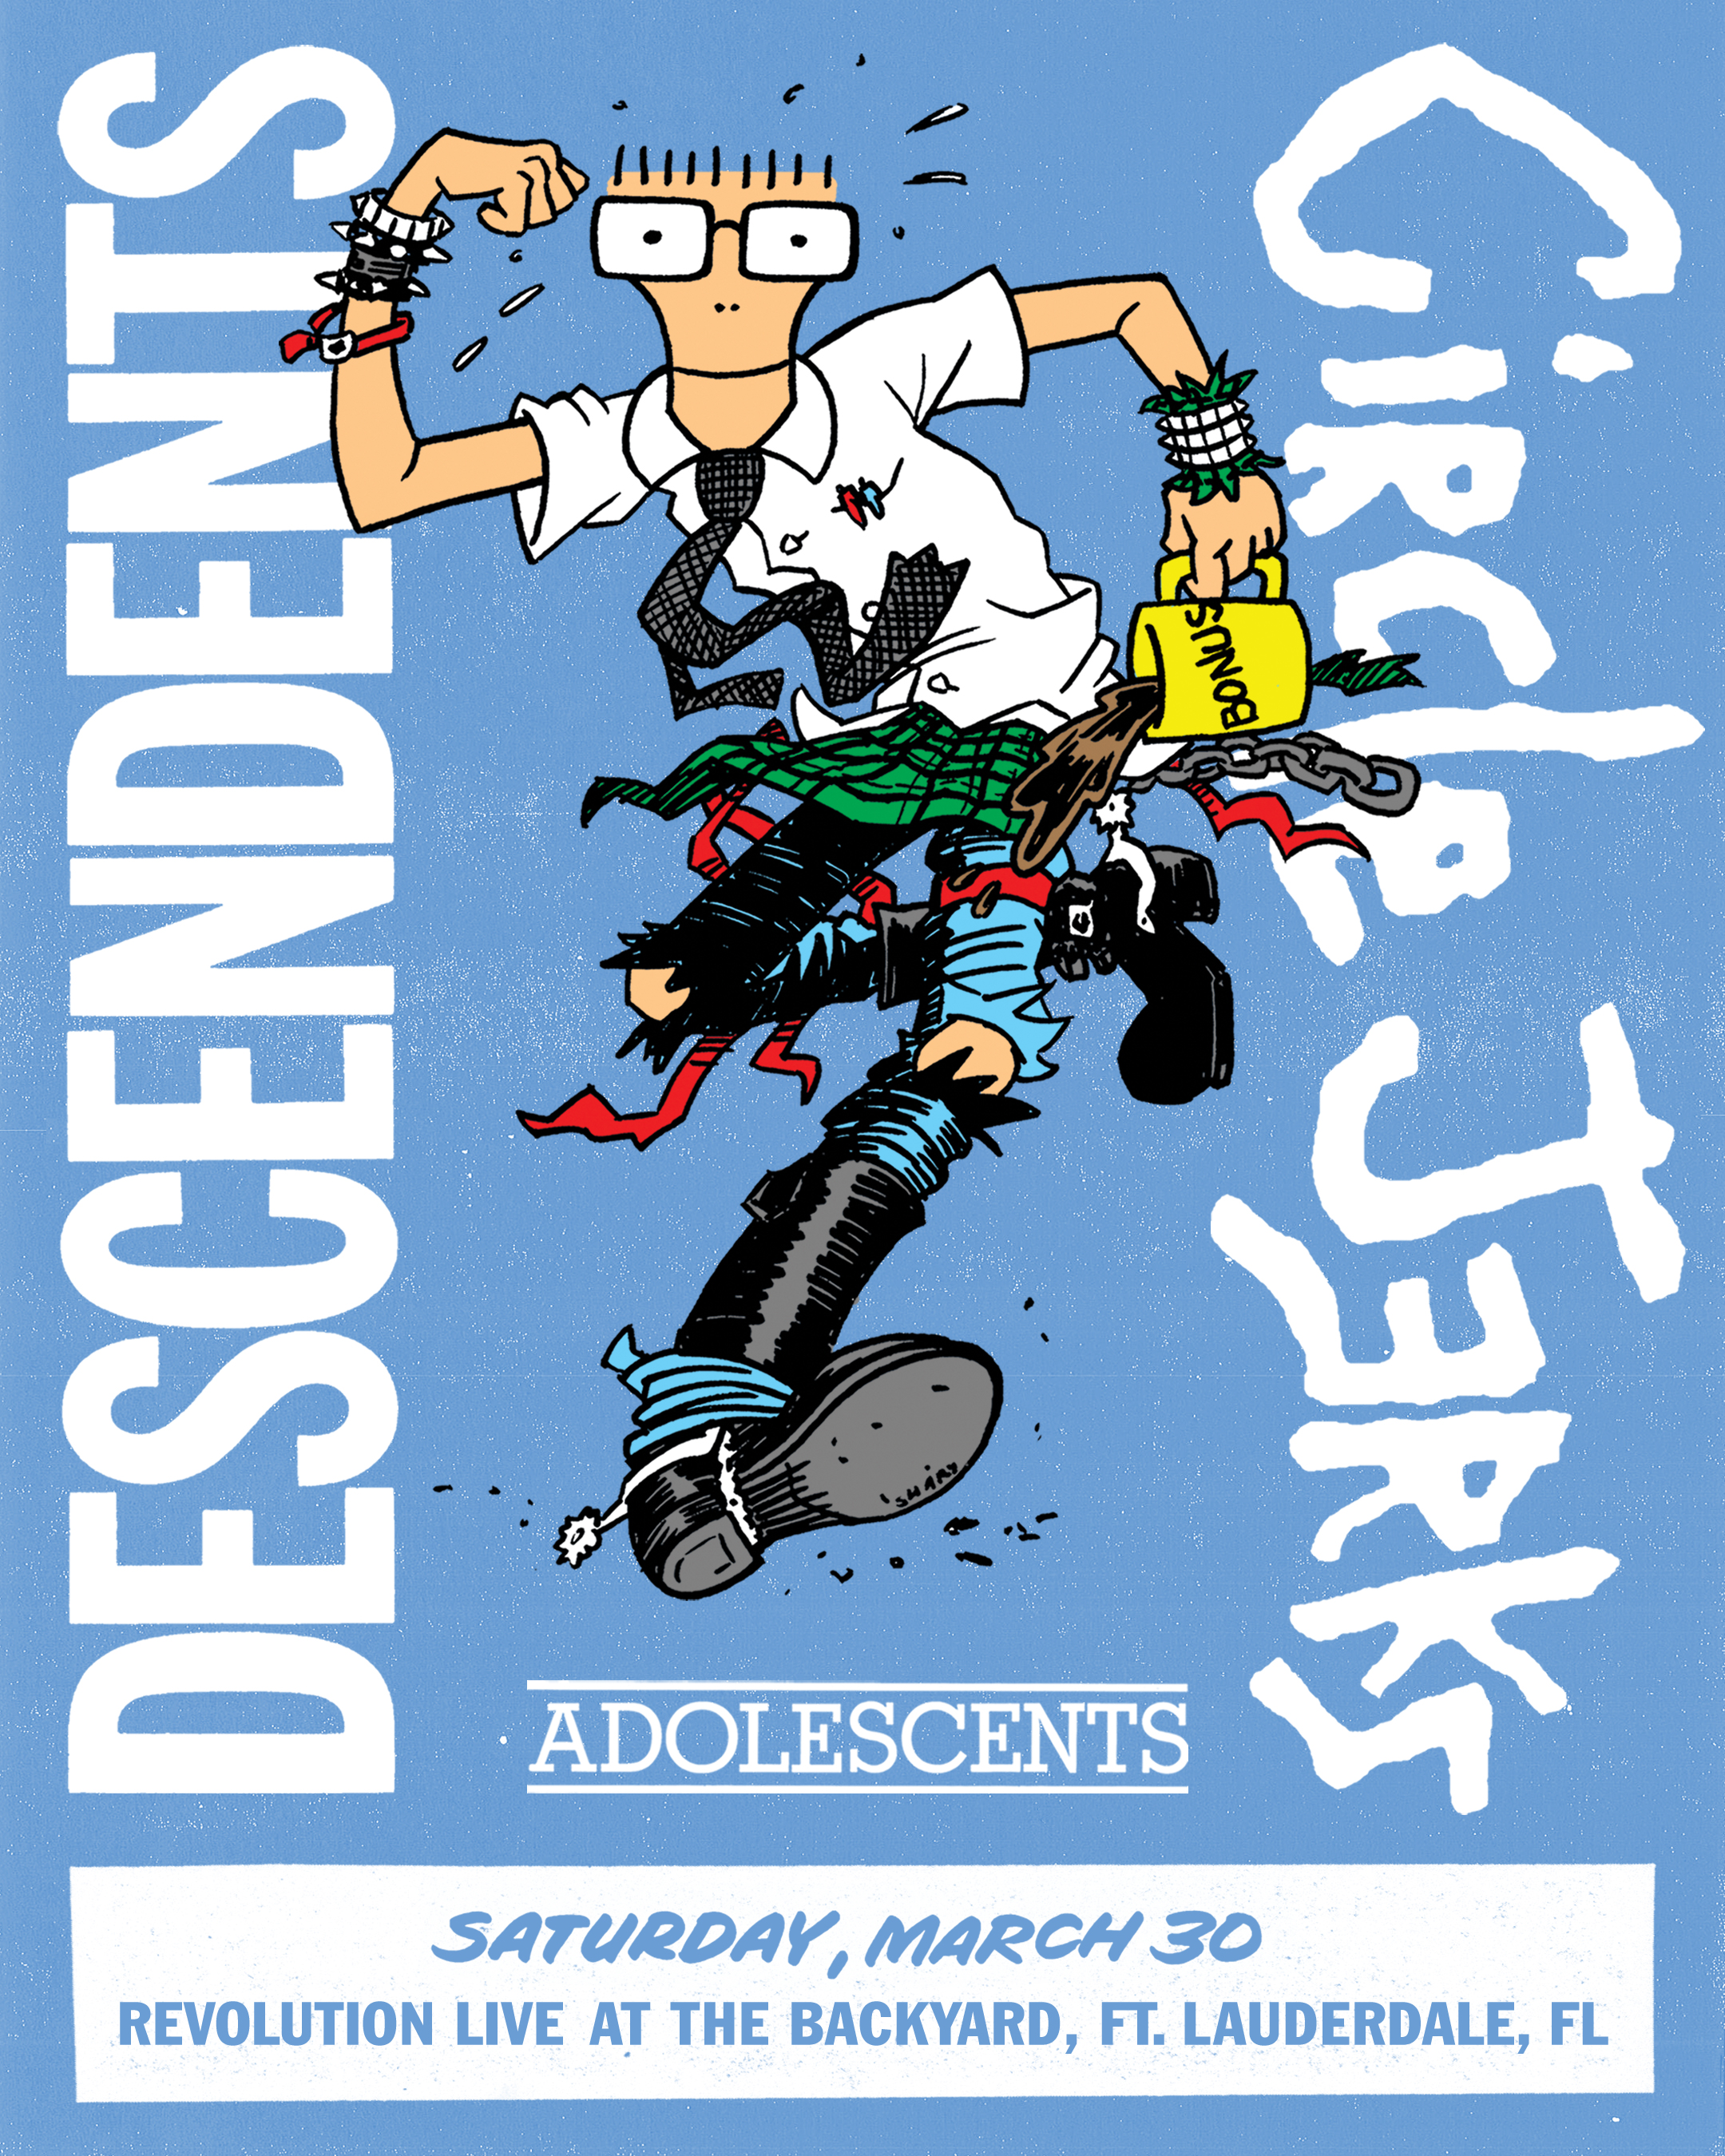 Circle Jerks and Descendents